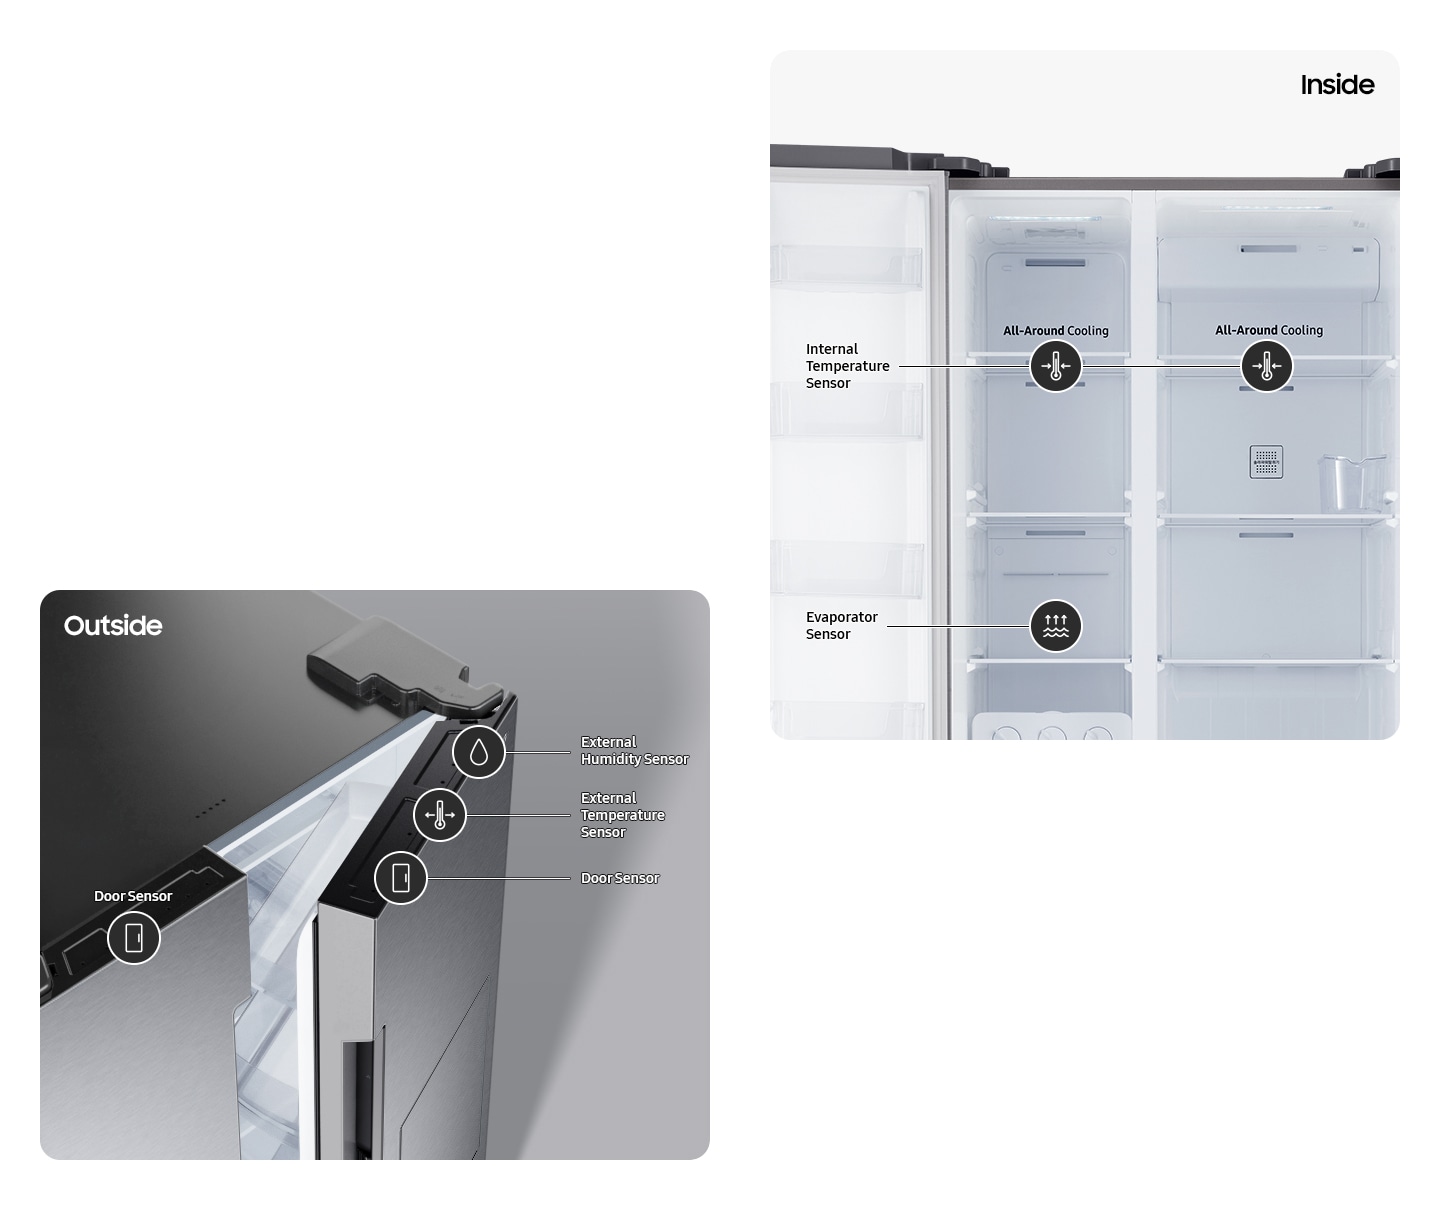 There are 7 Smart Sensors, including 2 door sensors on each side, external humidity sensor and external temperature sensor on the outside, and on the inside, internal temperature sensors on each fridge and freezer, and an evaporator sensor.